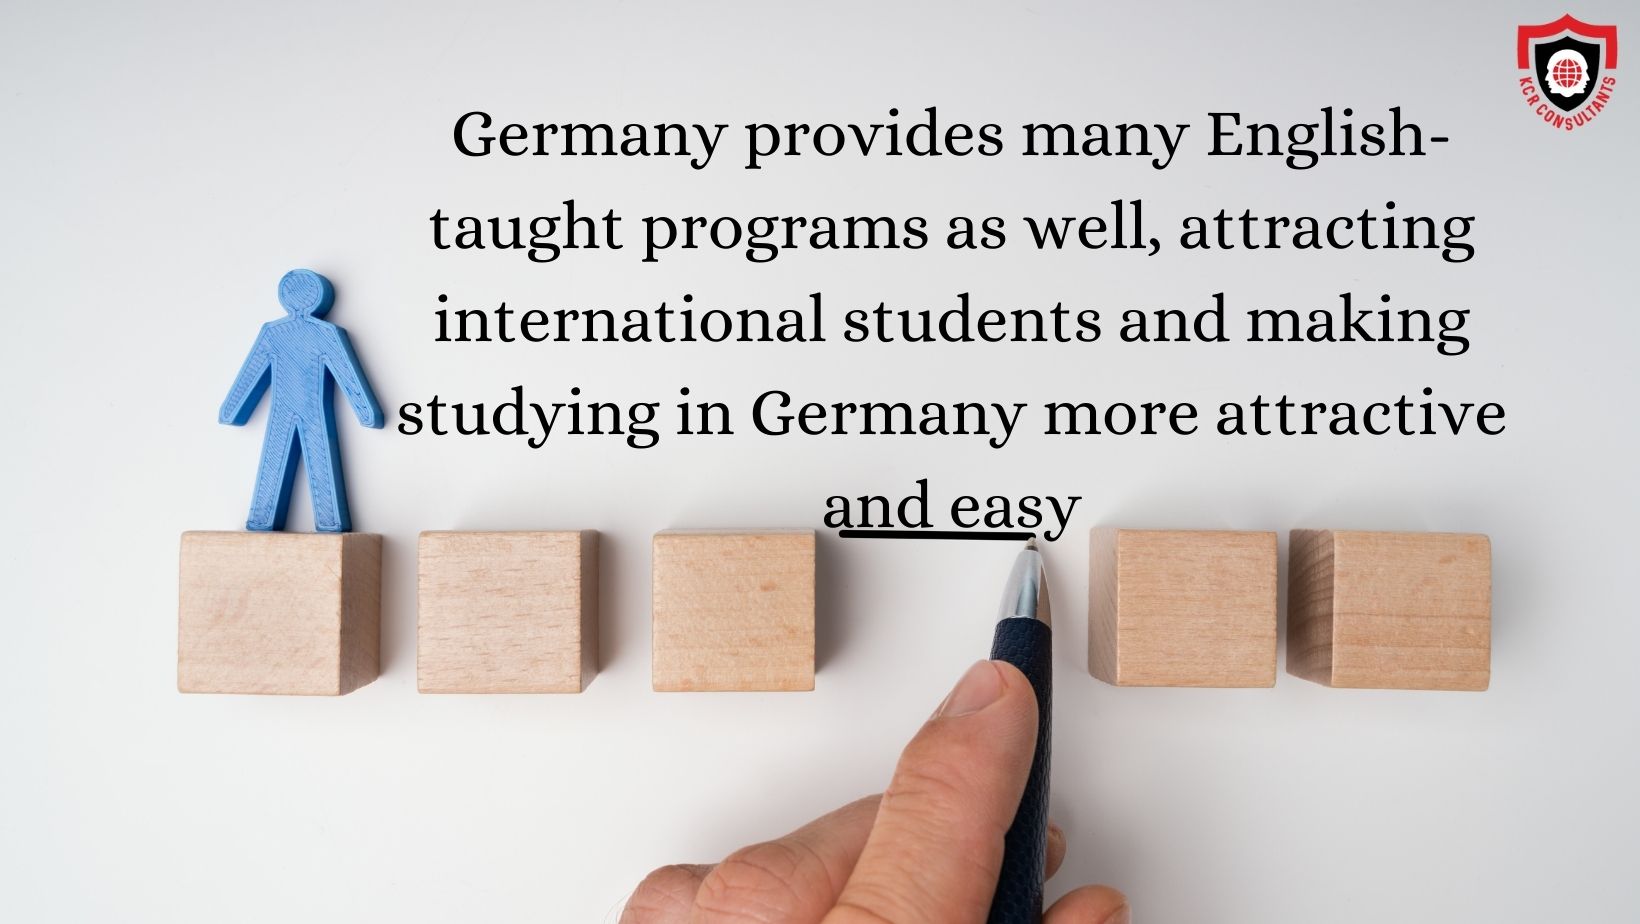 STUDY IN GERMANY - KCR CONSULTANTS - English-taught programs - Germany university